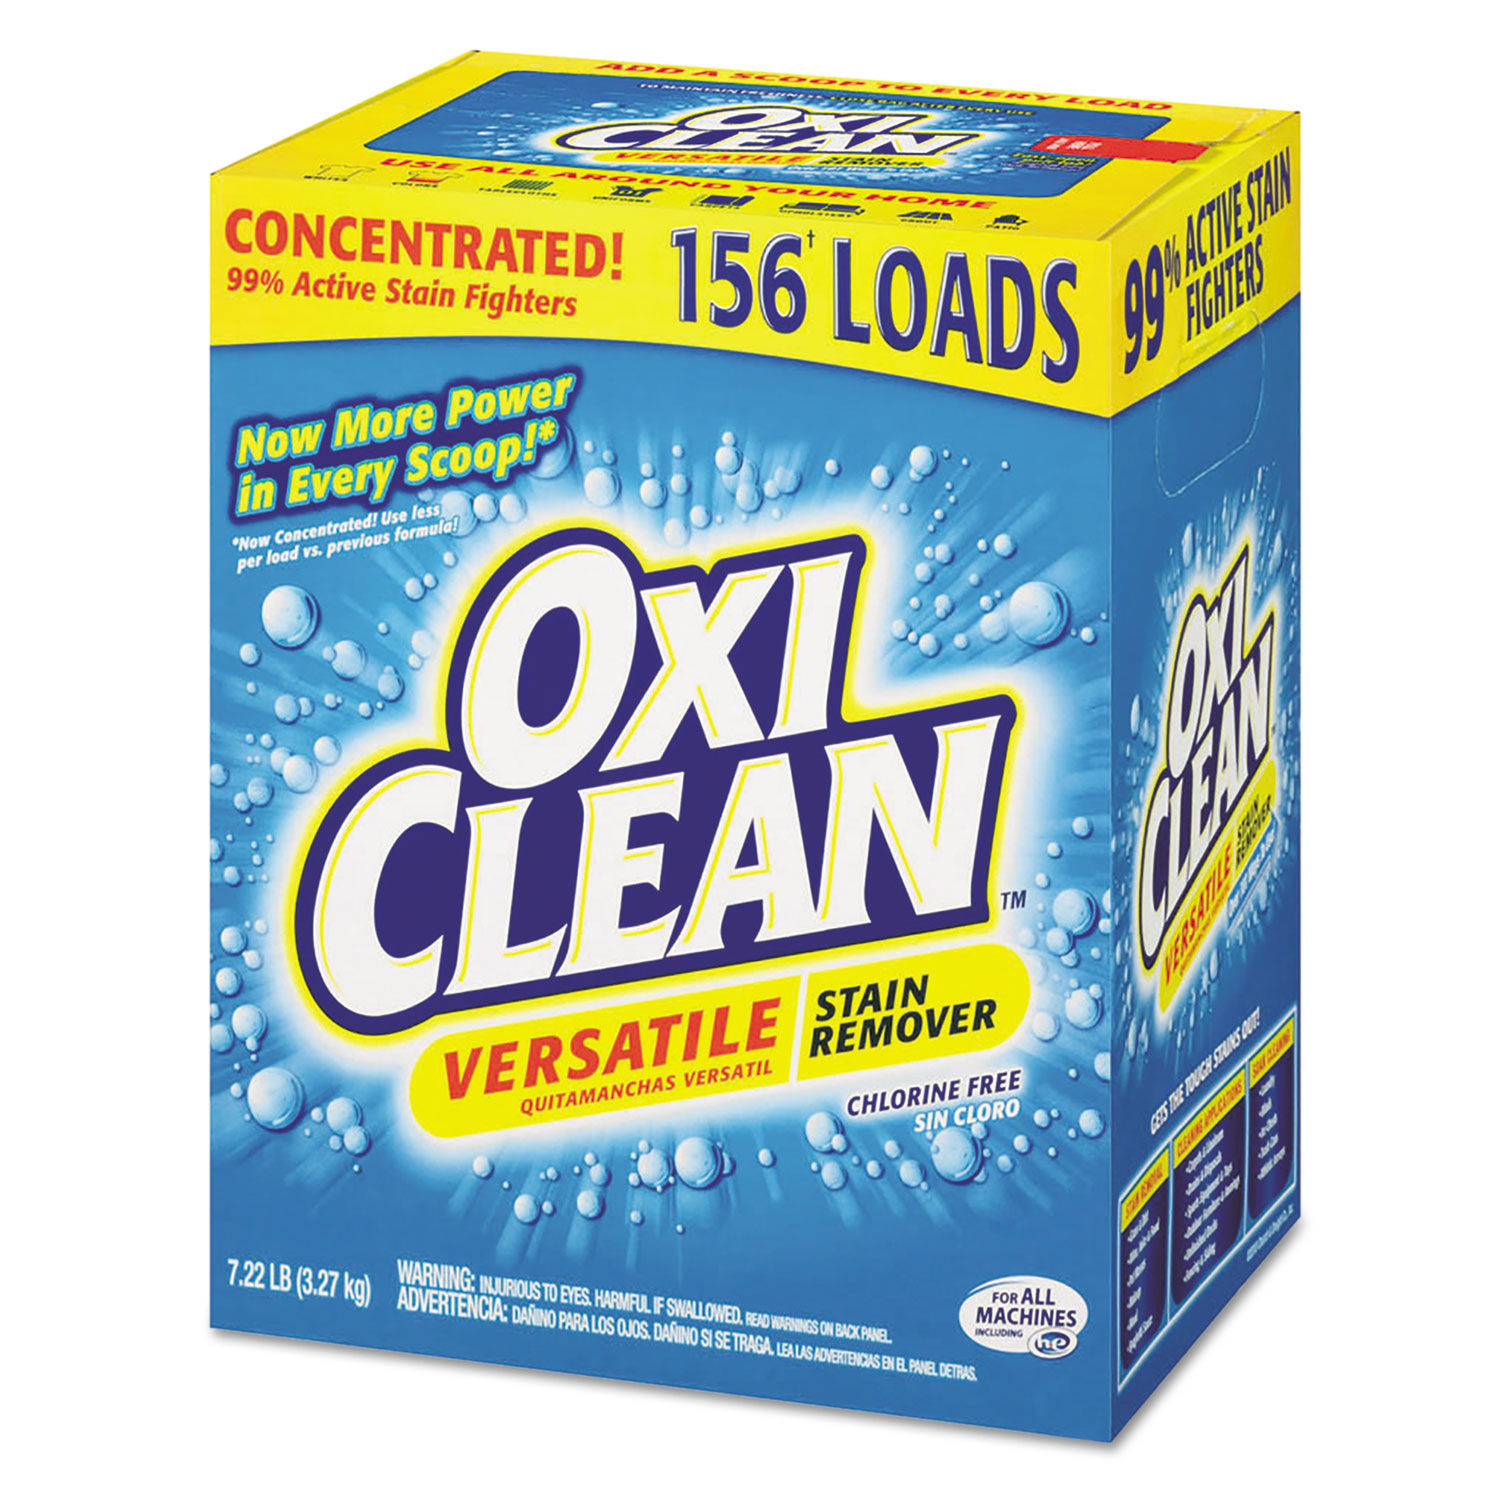 OxiClean Laundry Whitener + Stain Remover, Power Paks 24 ea